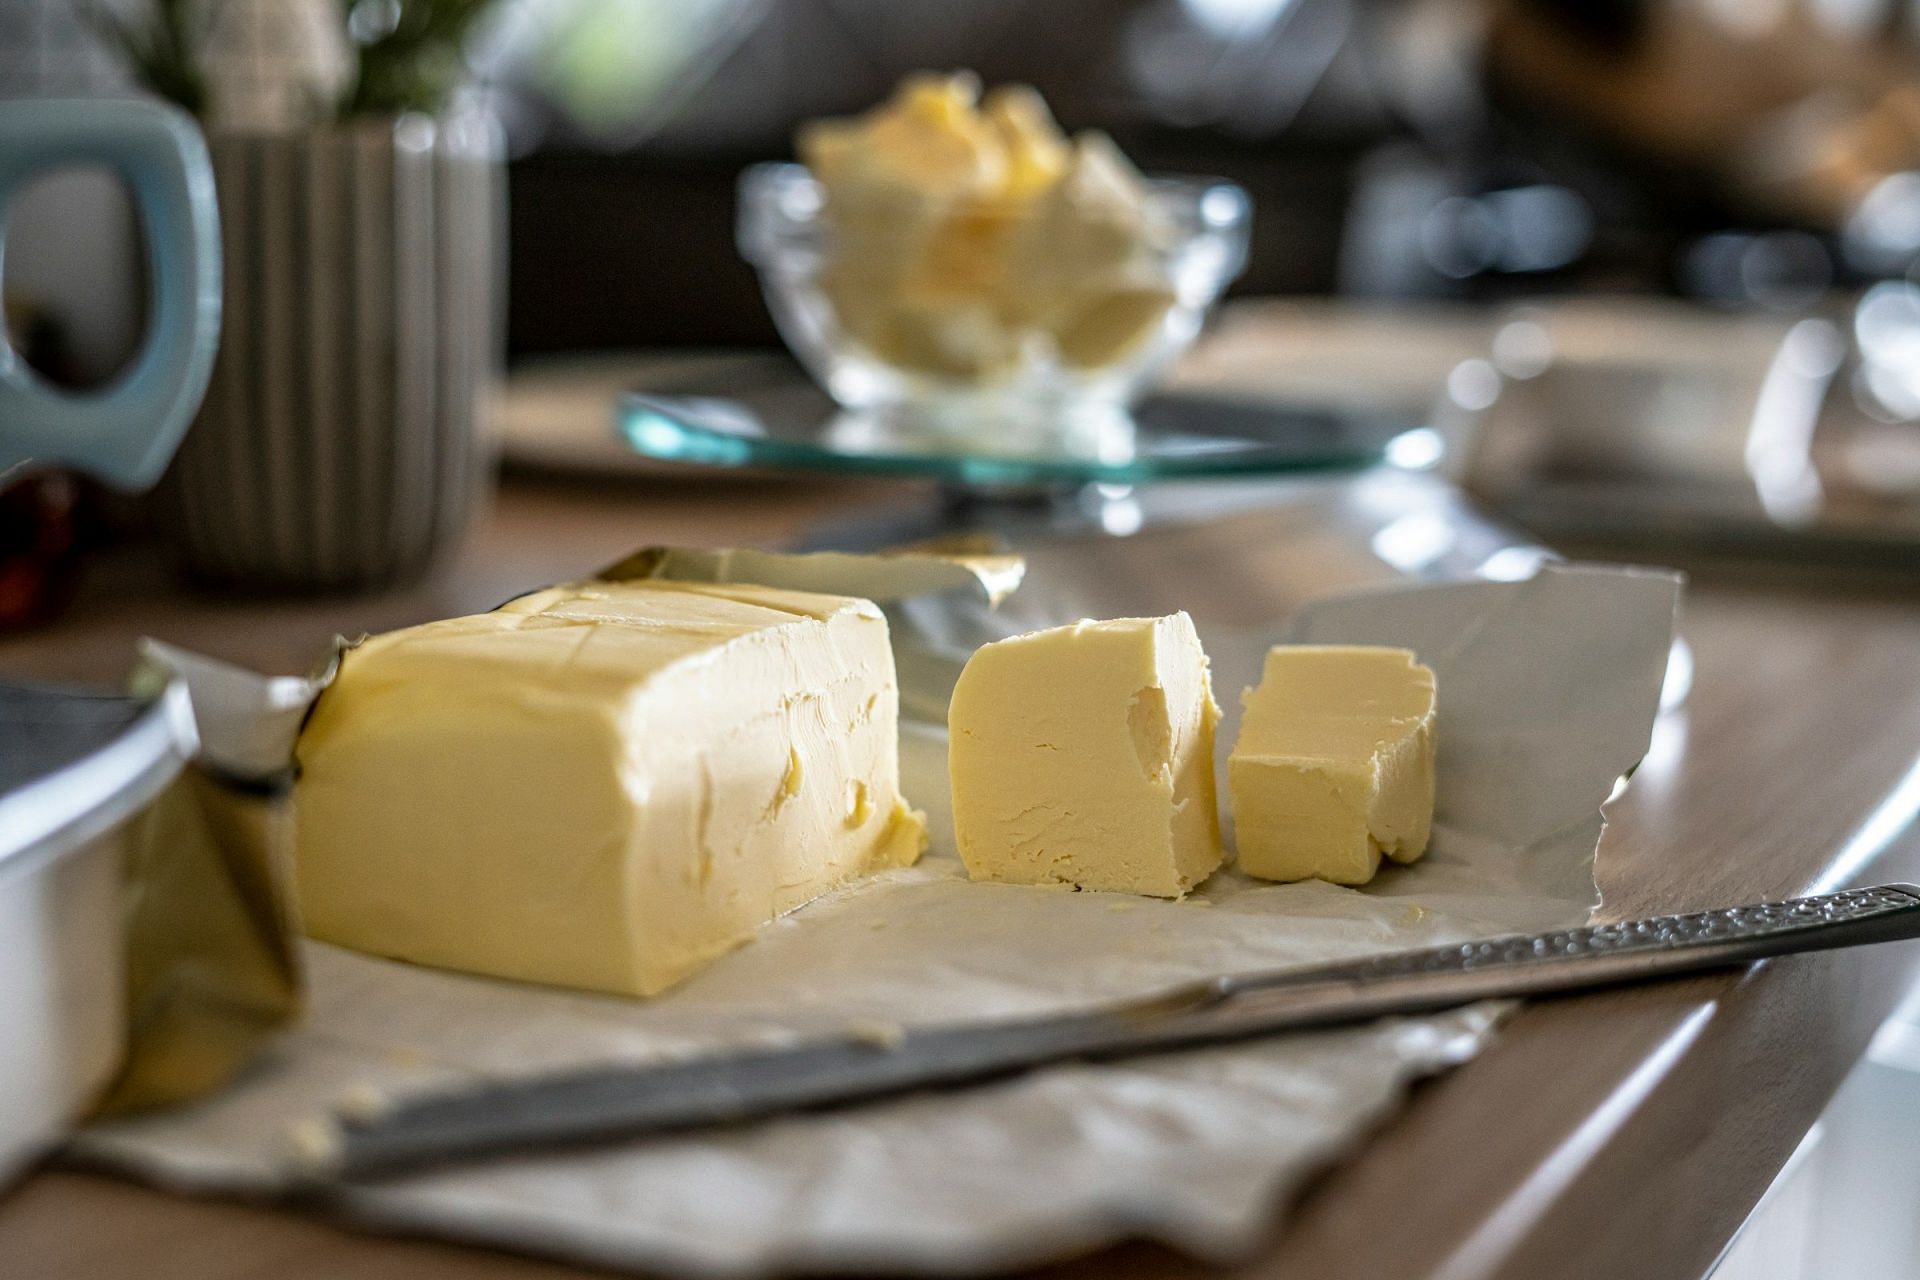 Butter too is considered one of the most unhealthy foods in the world (Image by Sorin Gheorghita/Unsplash)